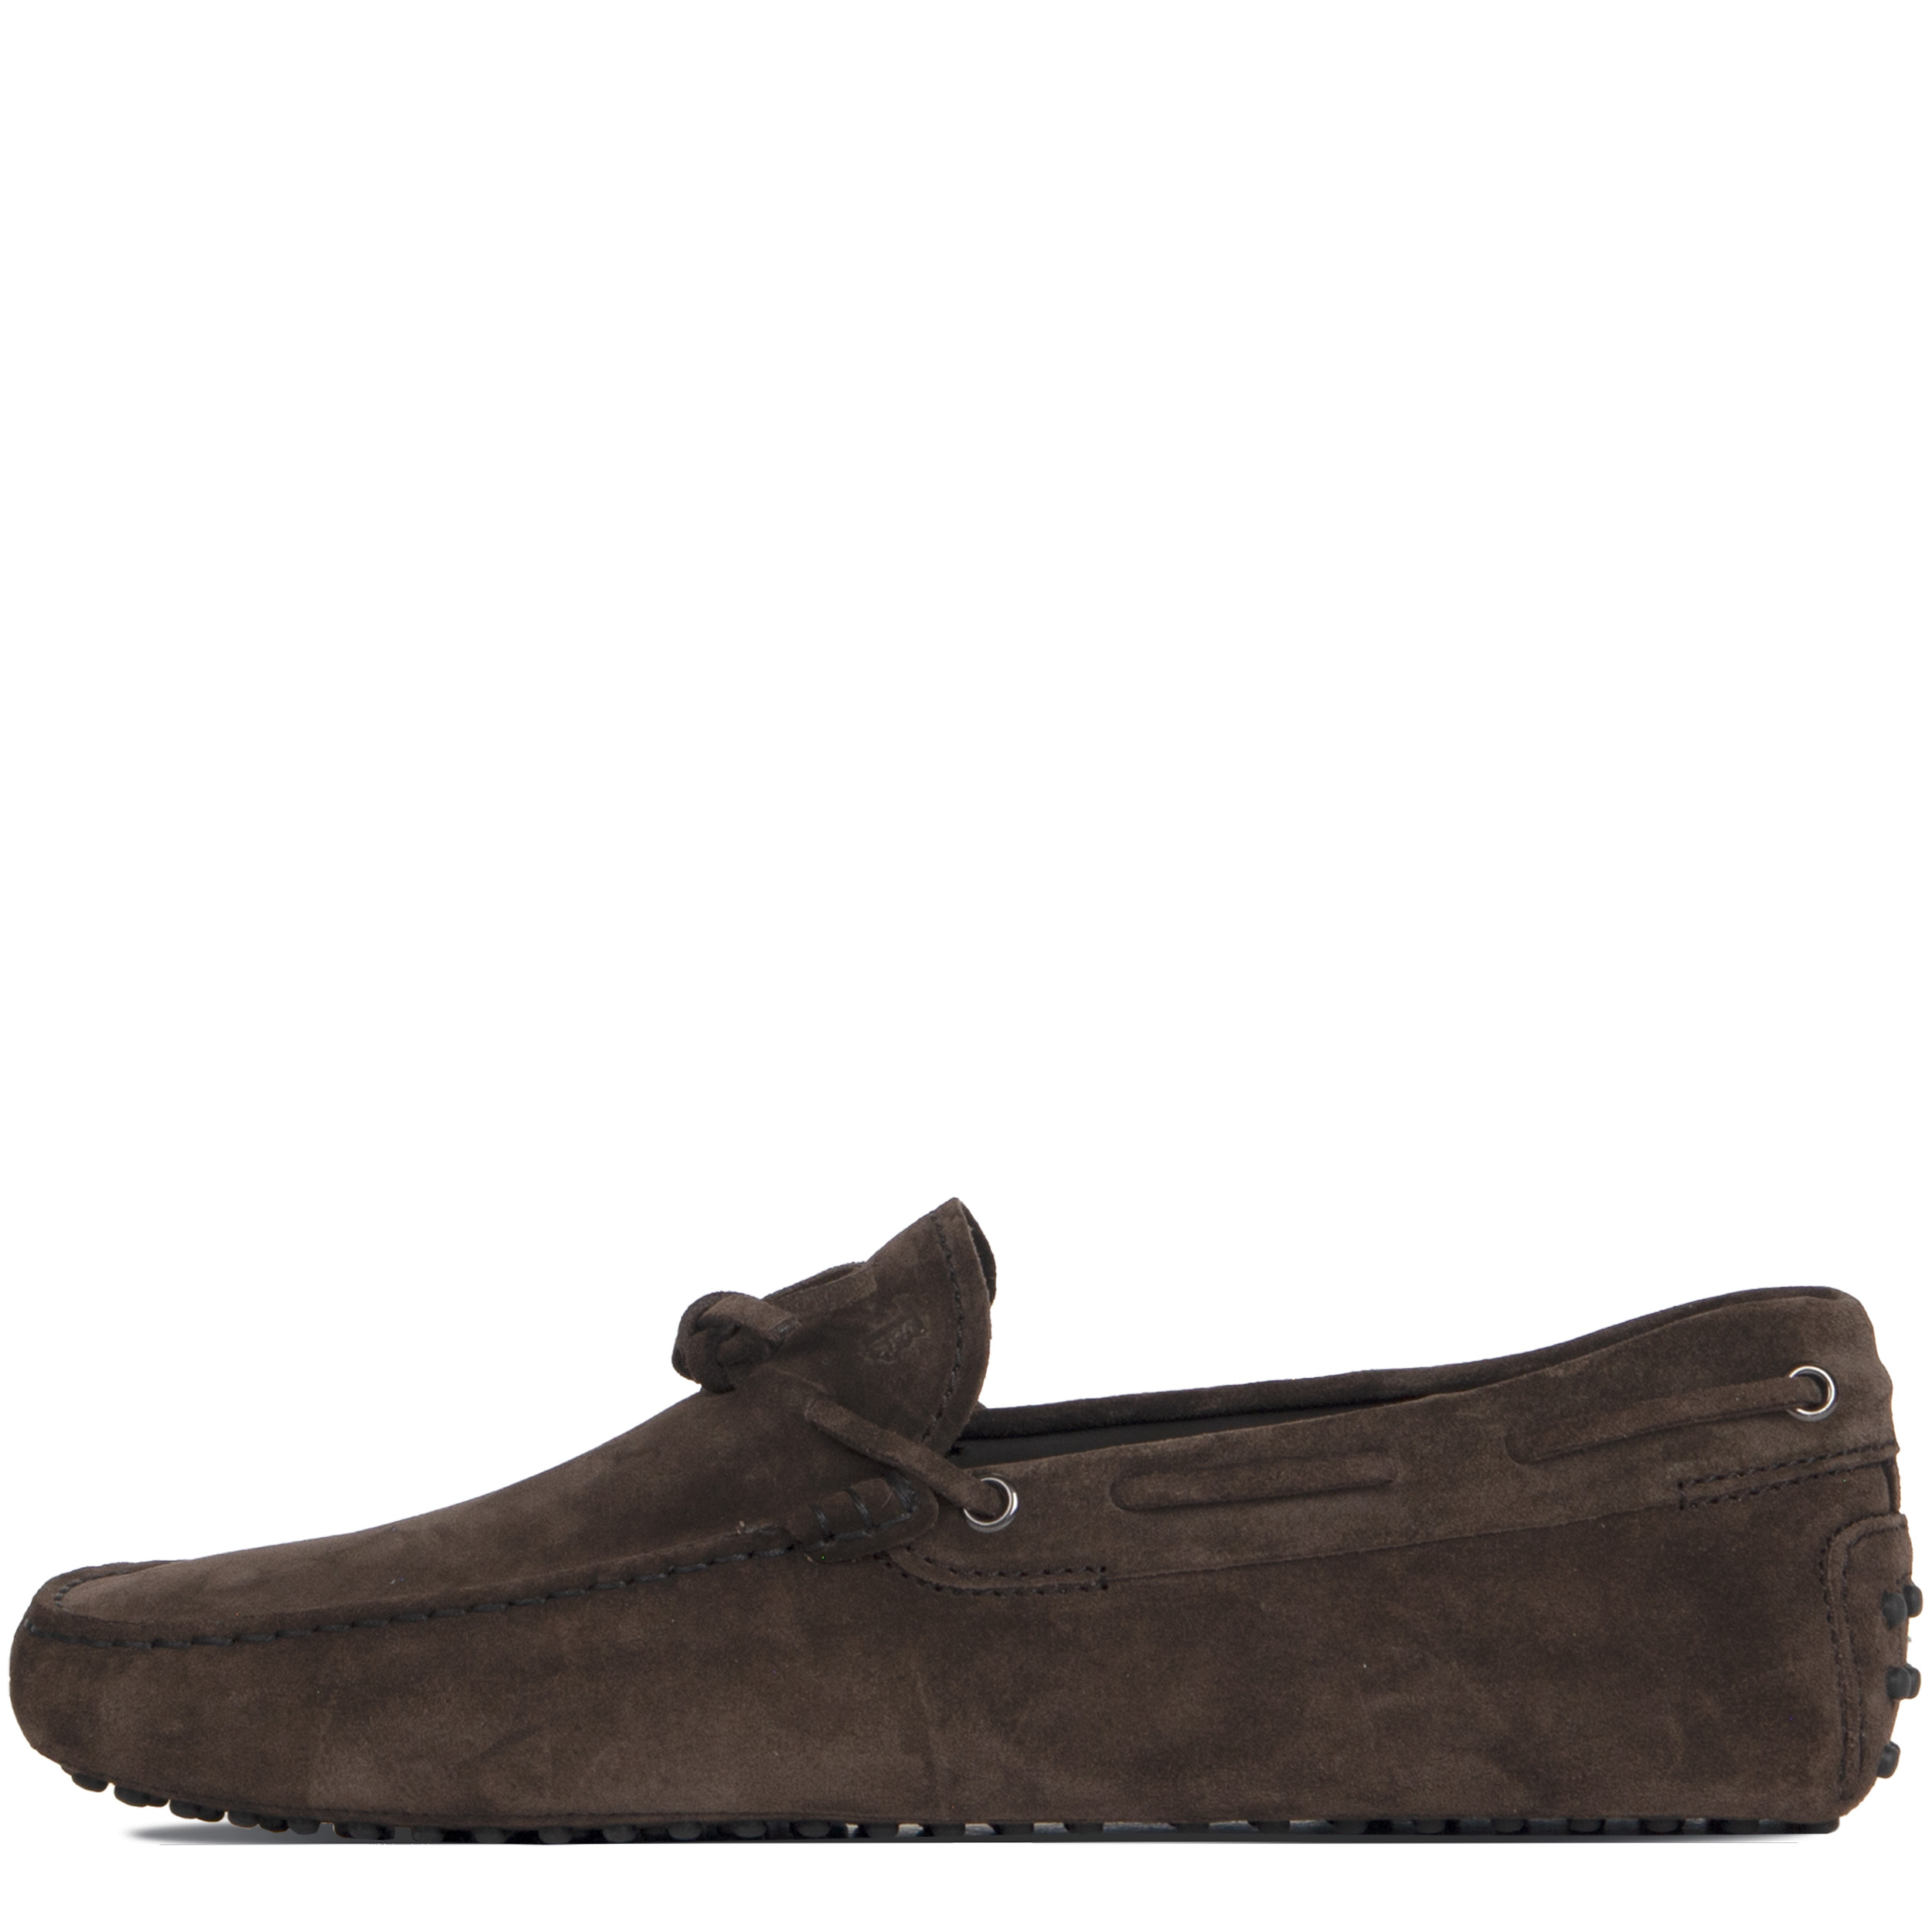 TODS Gommino Suede Driving Shoes Dark Brown